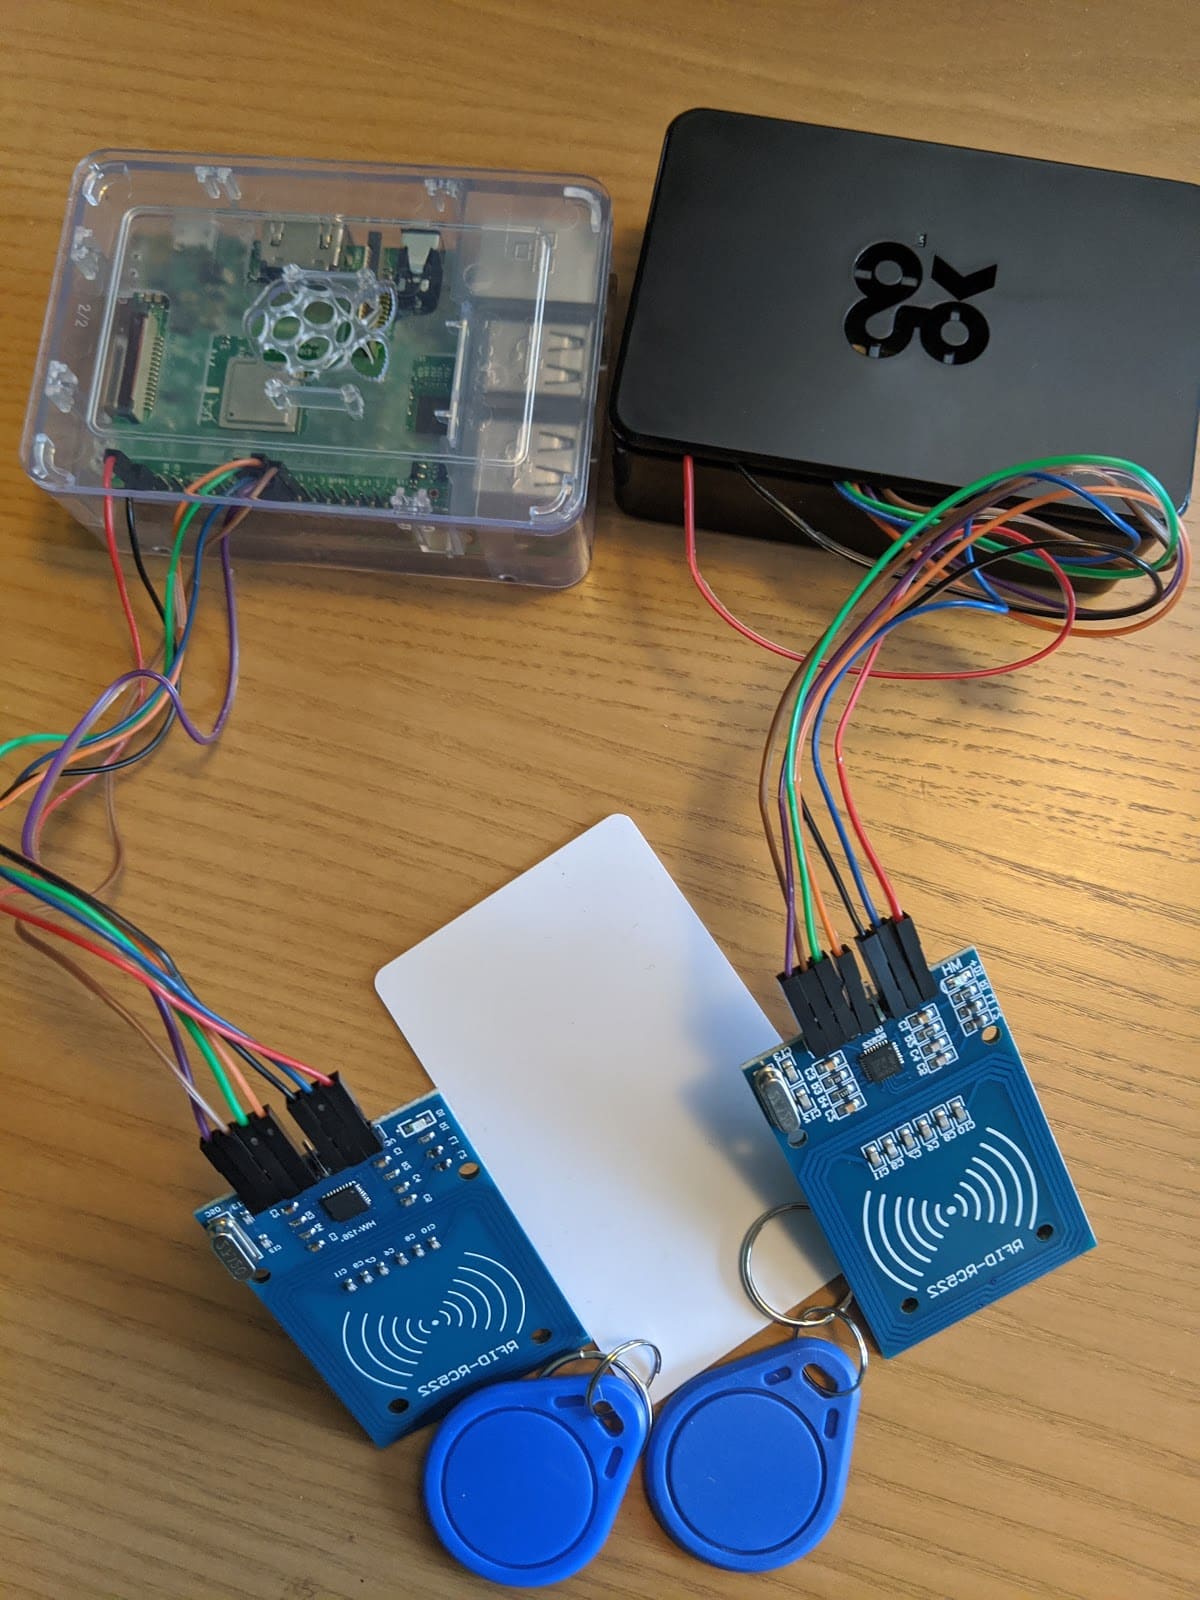 RFIDs and Raspberry Pis to be used for AWS IoT Rapid Prototyping Project